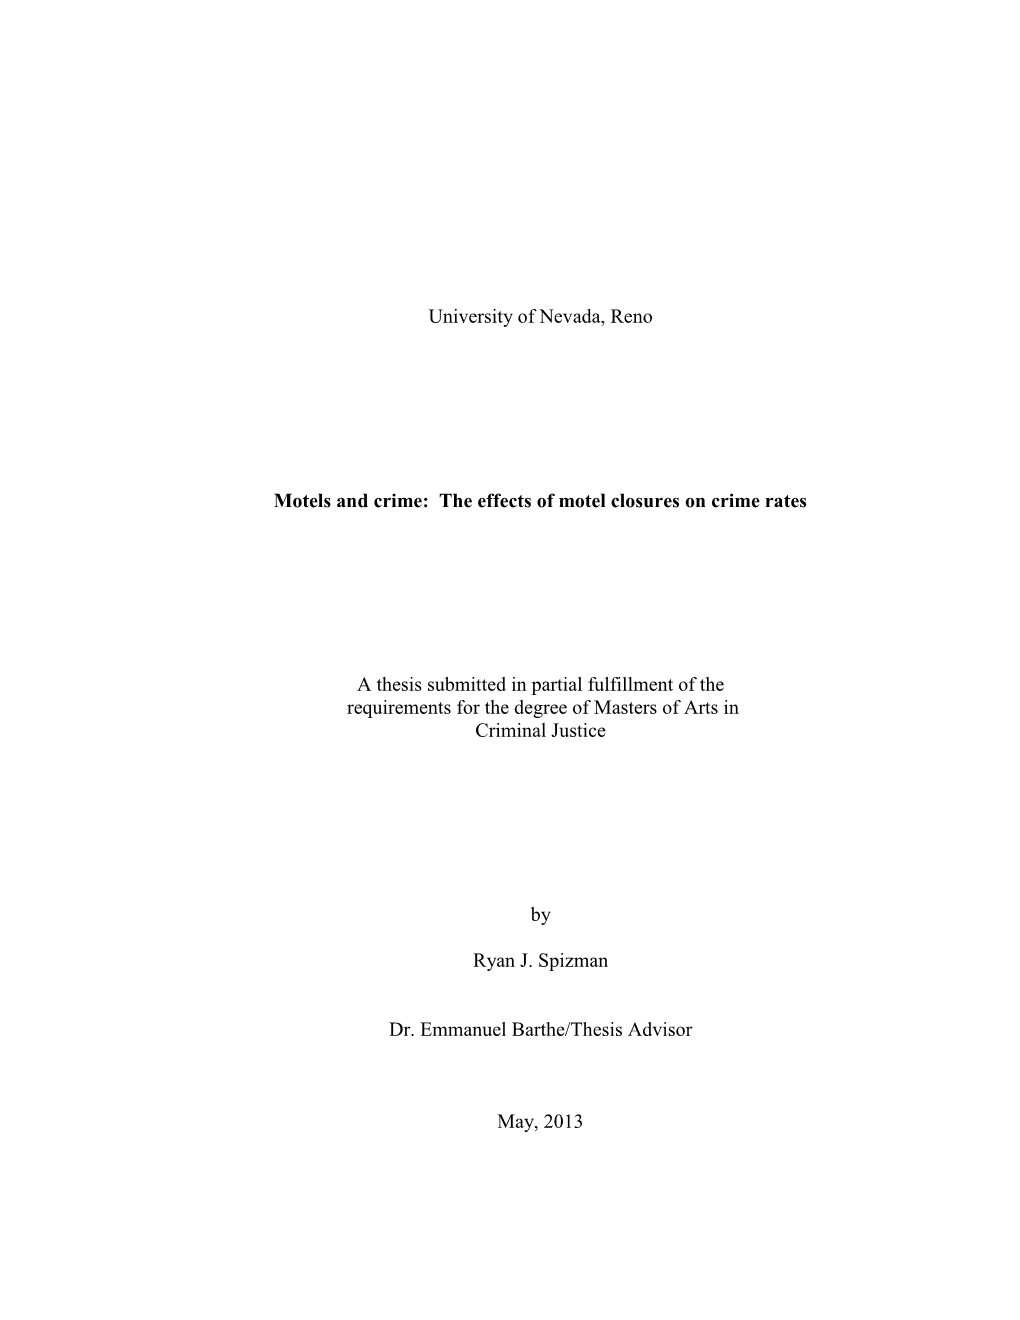 The Effects of Motel Closures on Crime Rates a Thesis Submitted in Partial Fulfill